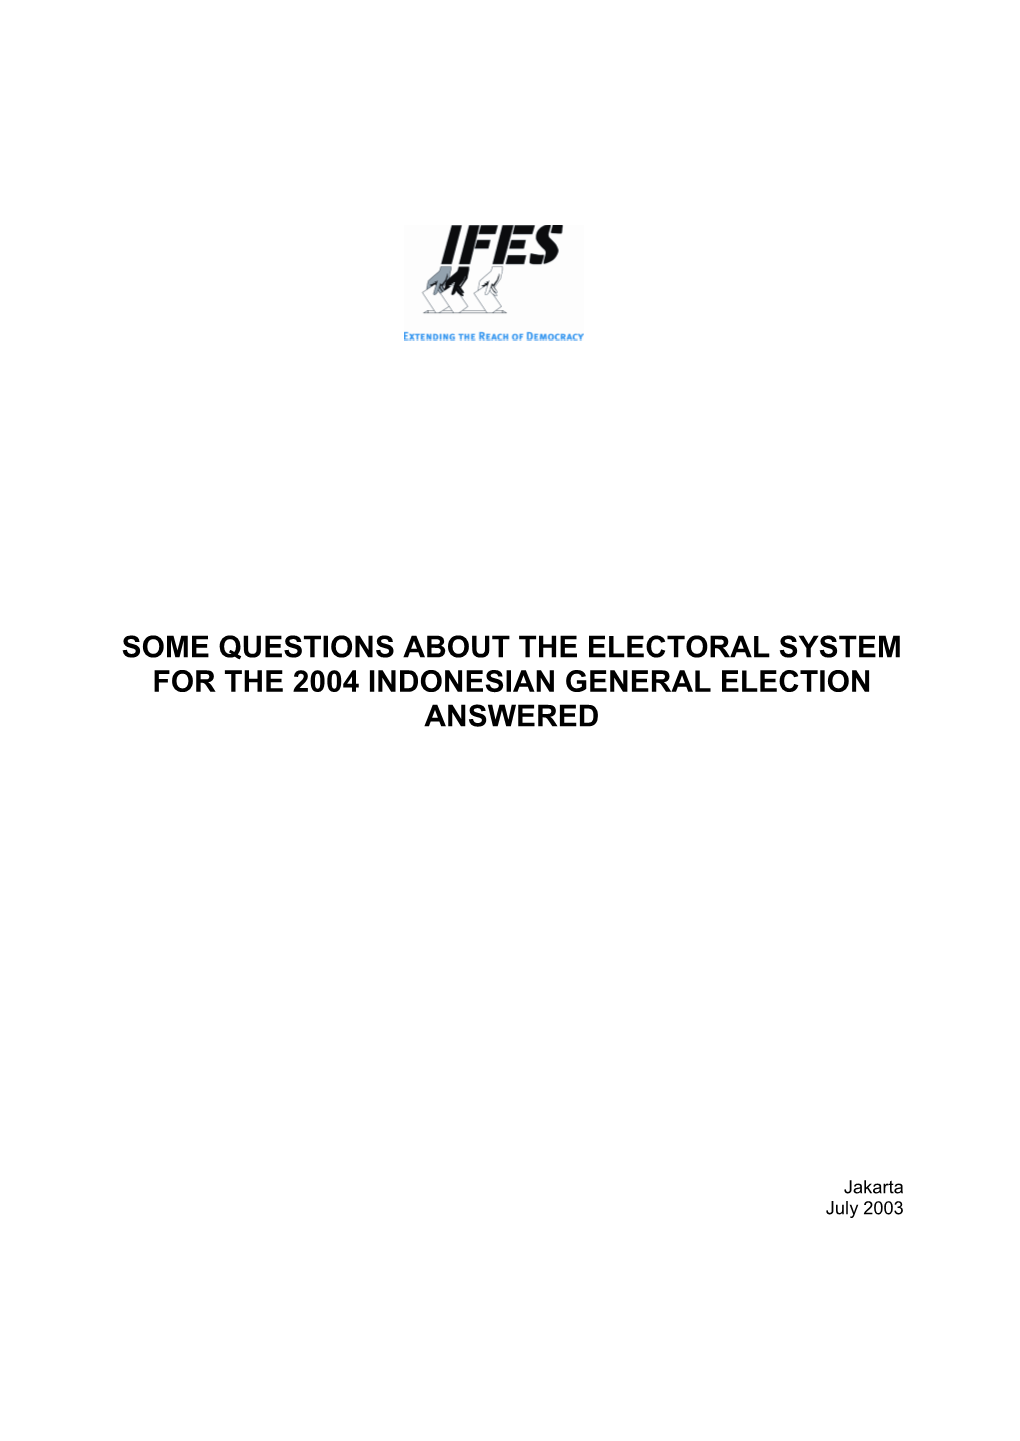 Some Questions About the Electoral System for the 2004 Indonesian General Election Answered